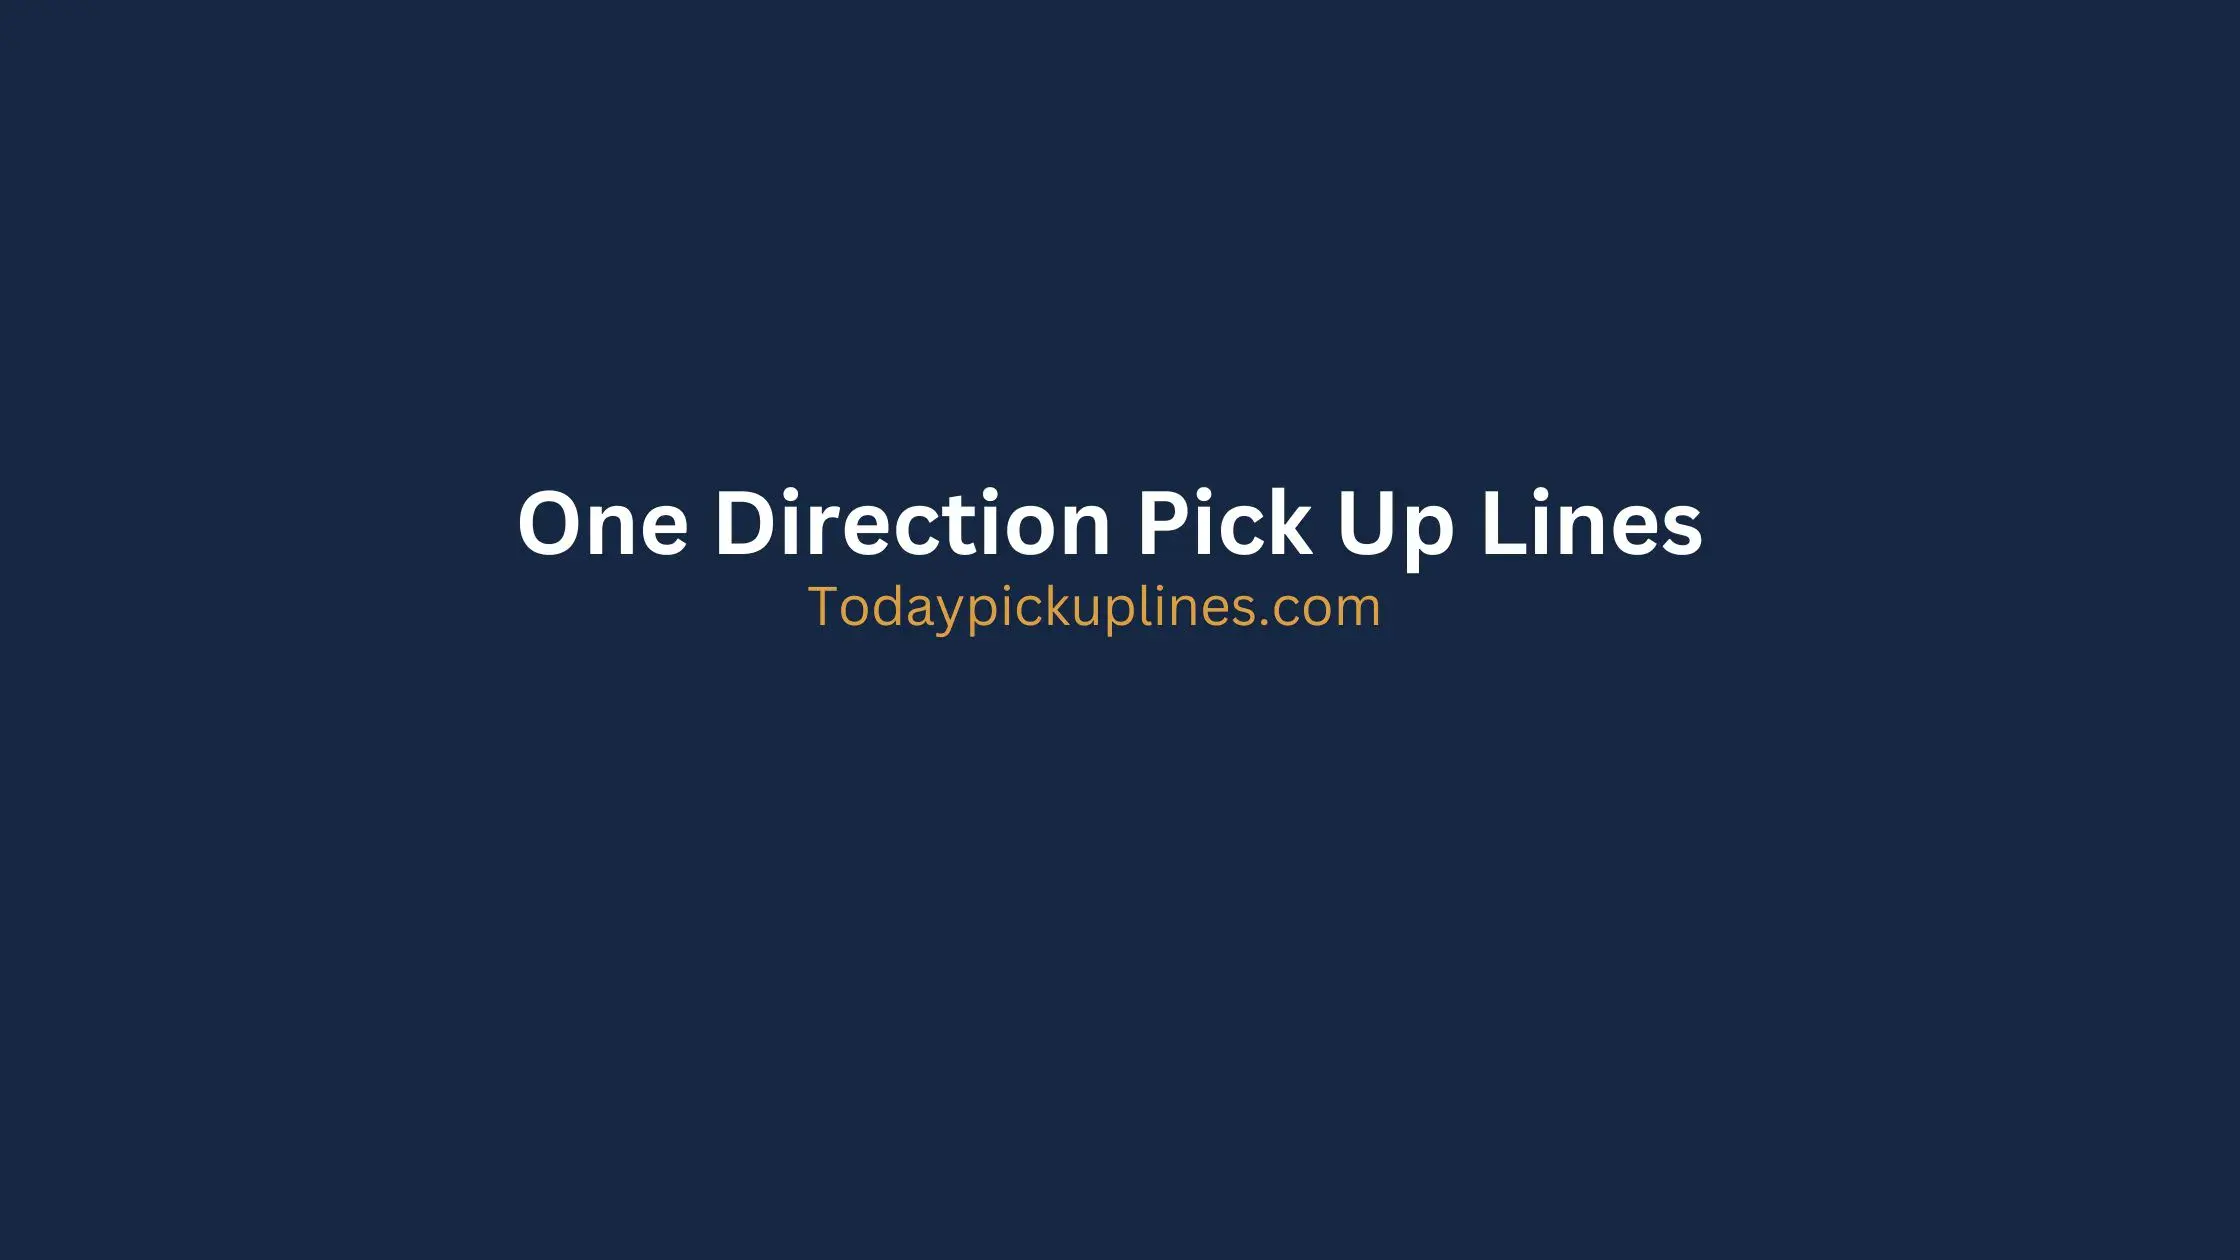 One Direction Pick Up Lines